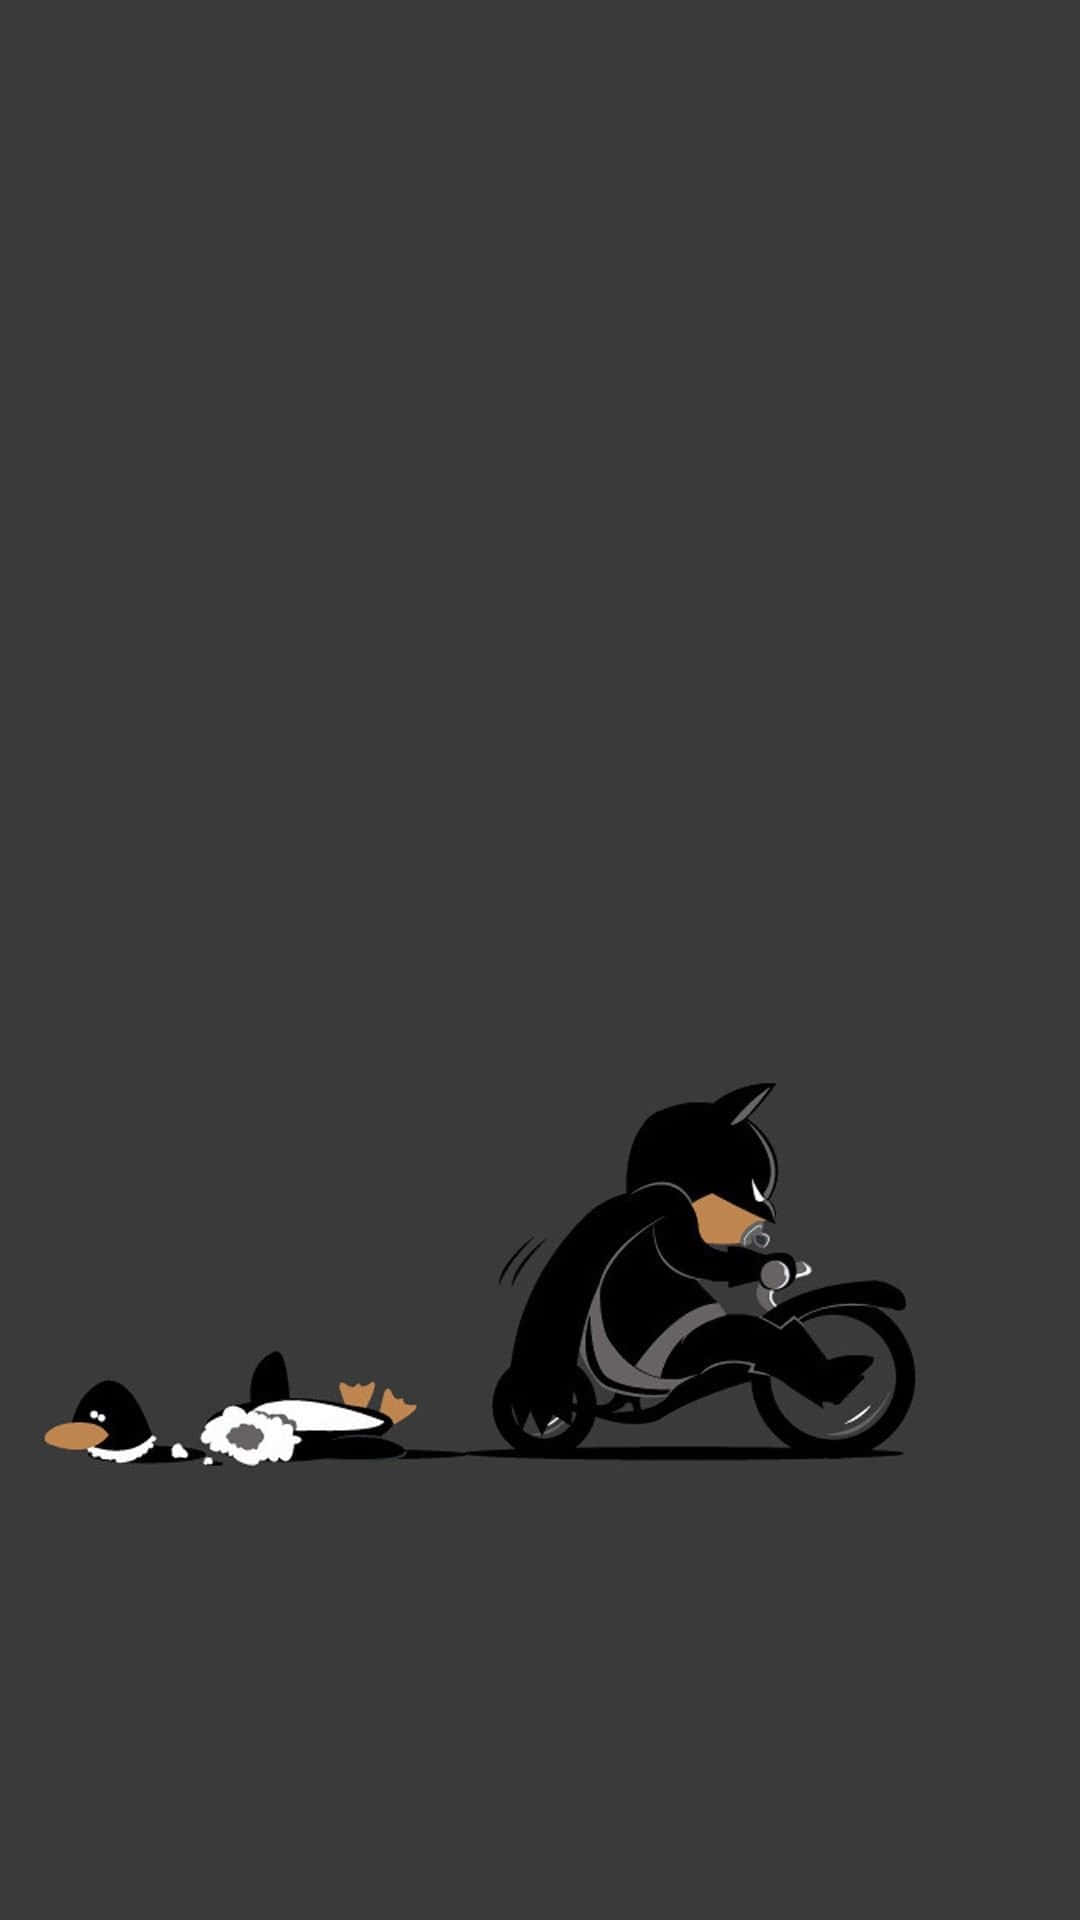 Batman And Penguin On A Motorcycle Wallpaper